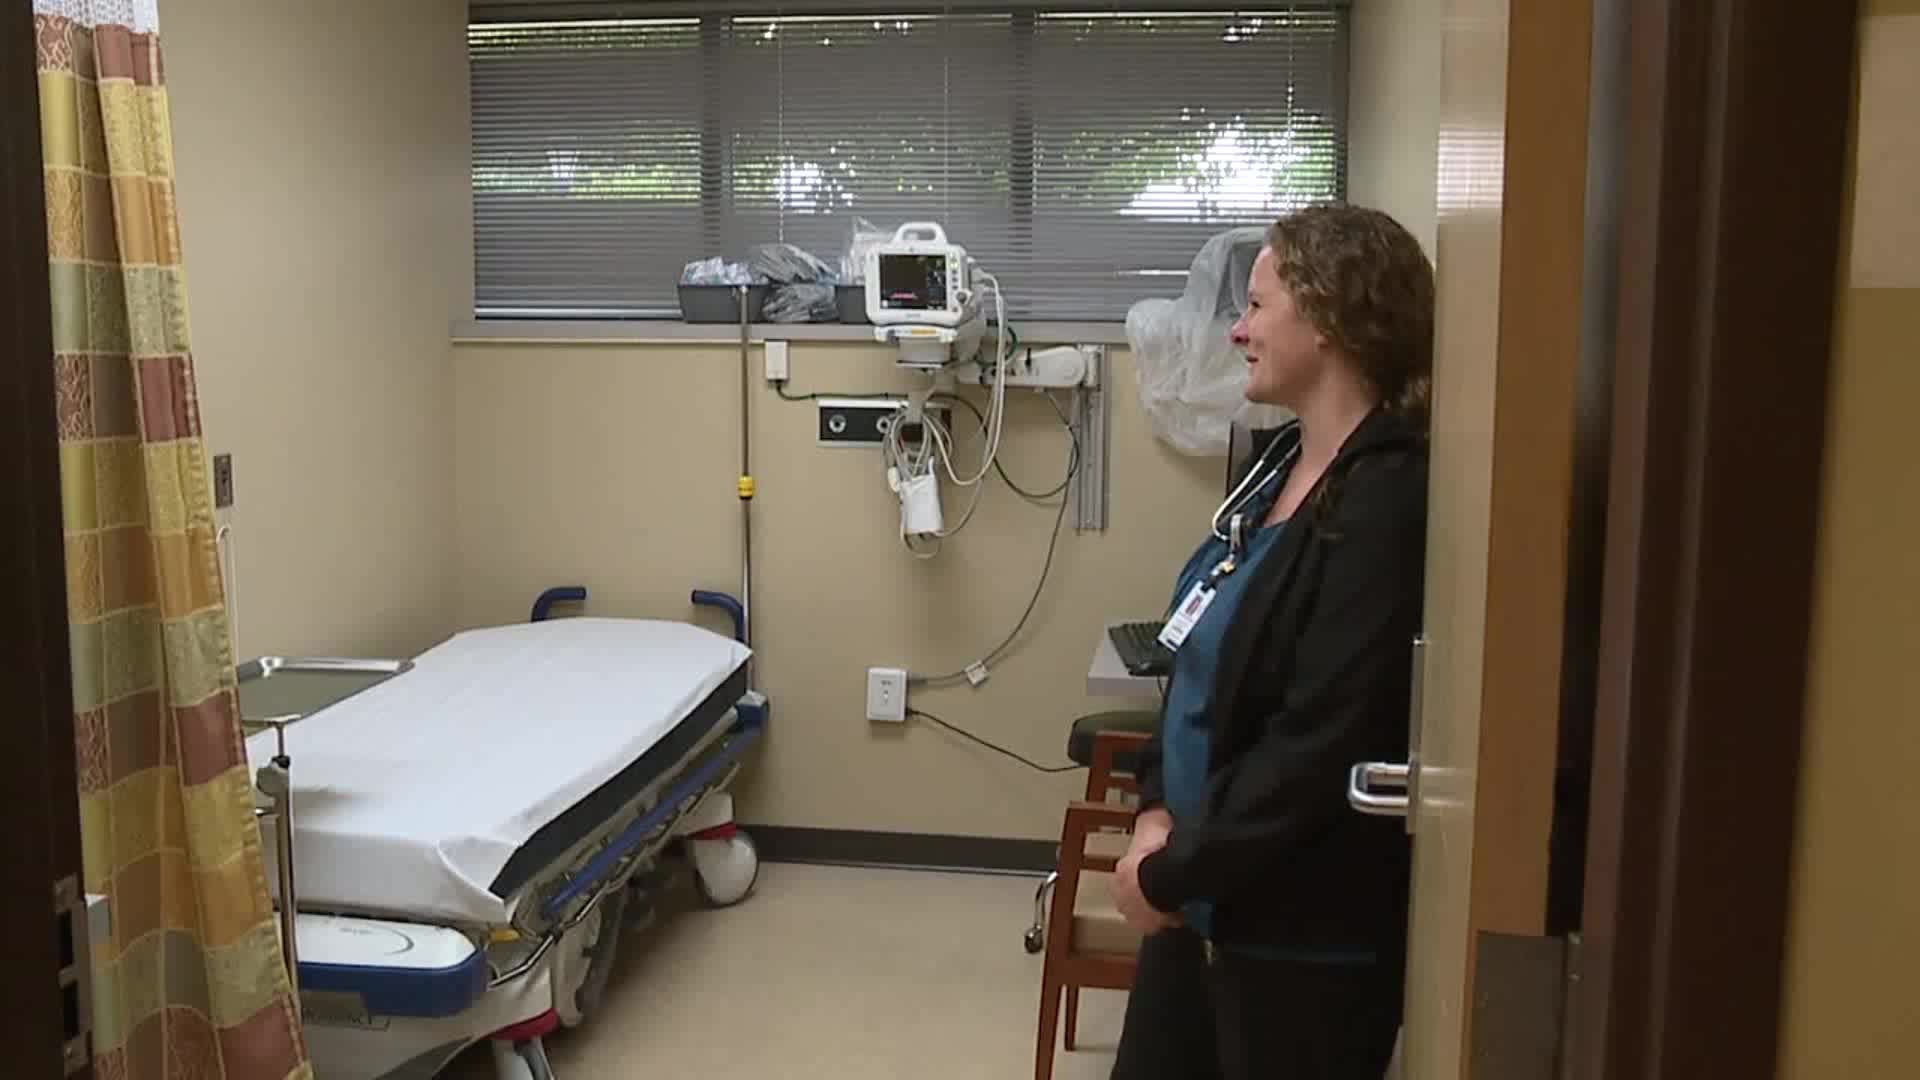 See how nurses struggle with daily tasks at this hospital